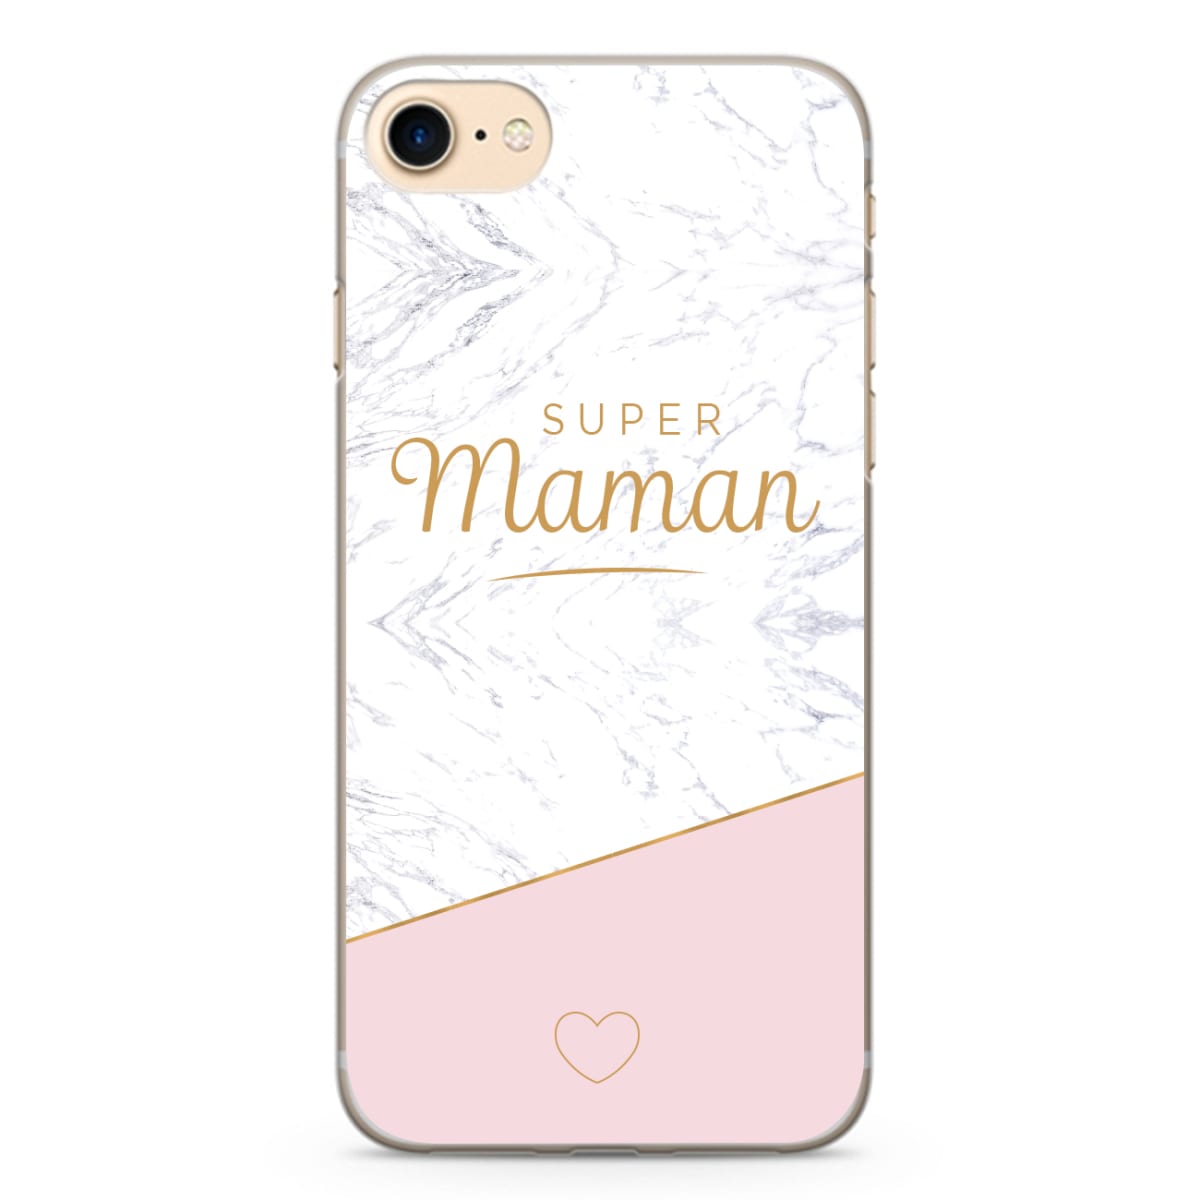 COVER DESIGN FOR IPHONE 8 SUPER MAMAN